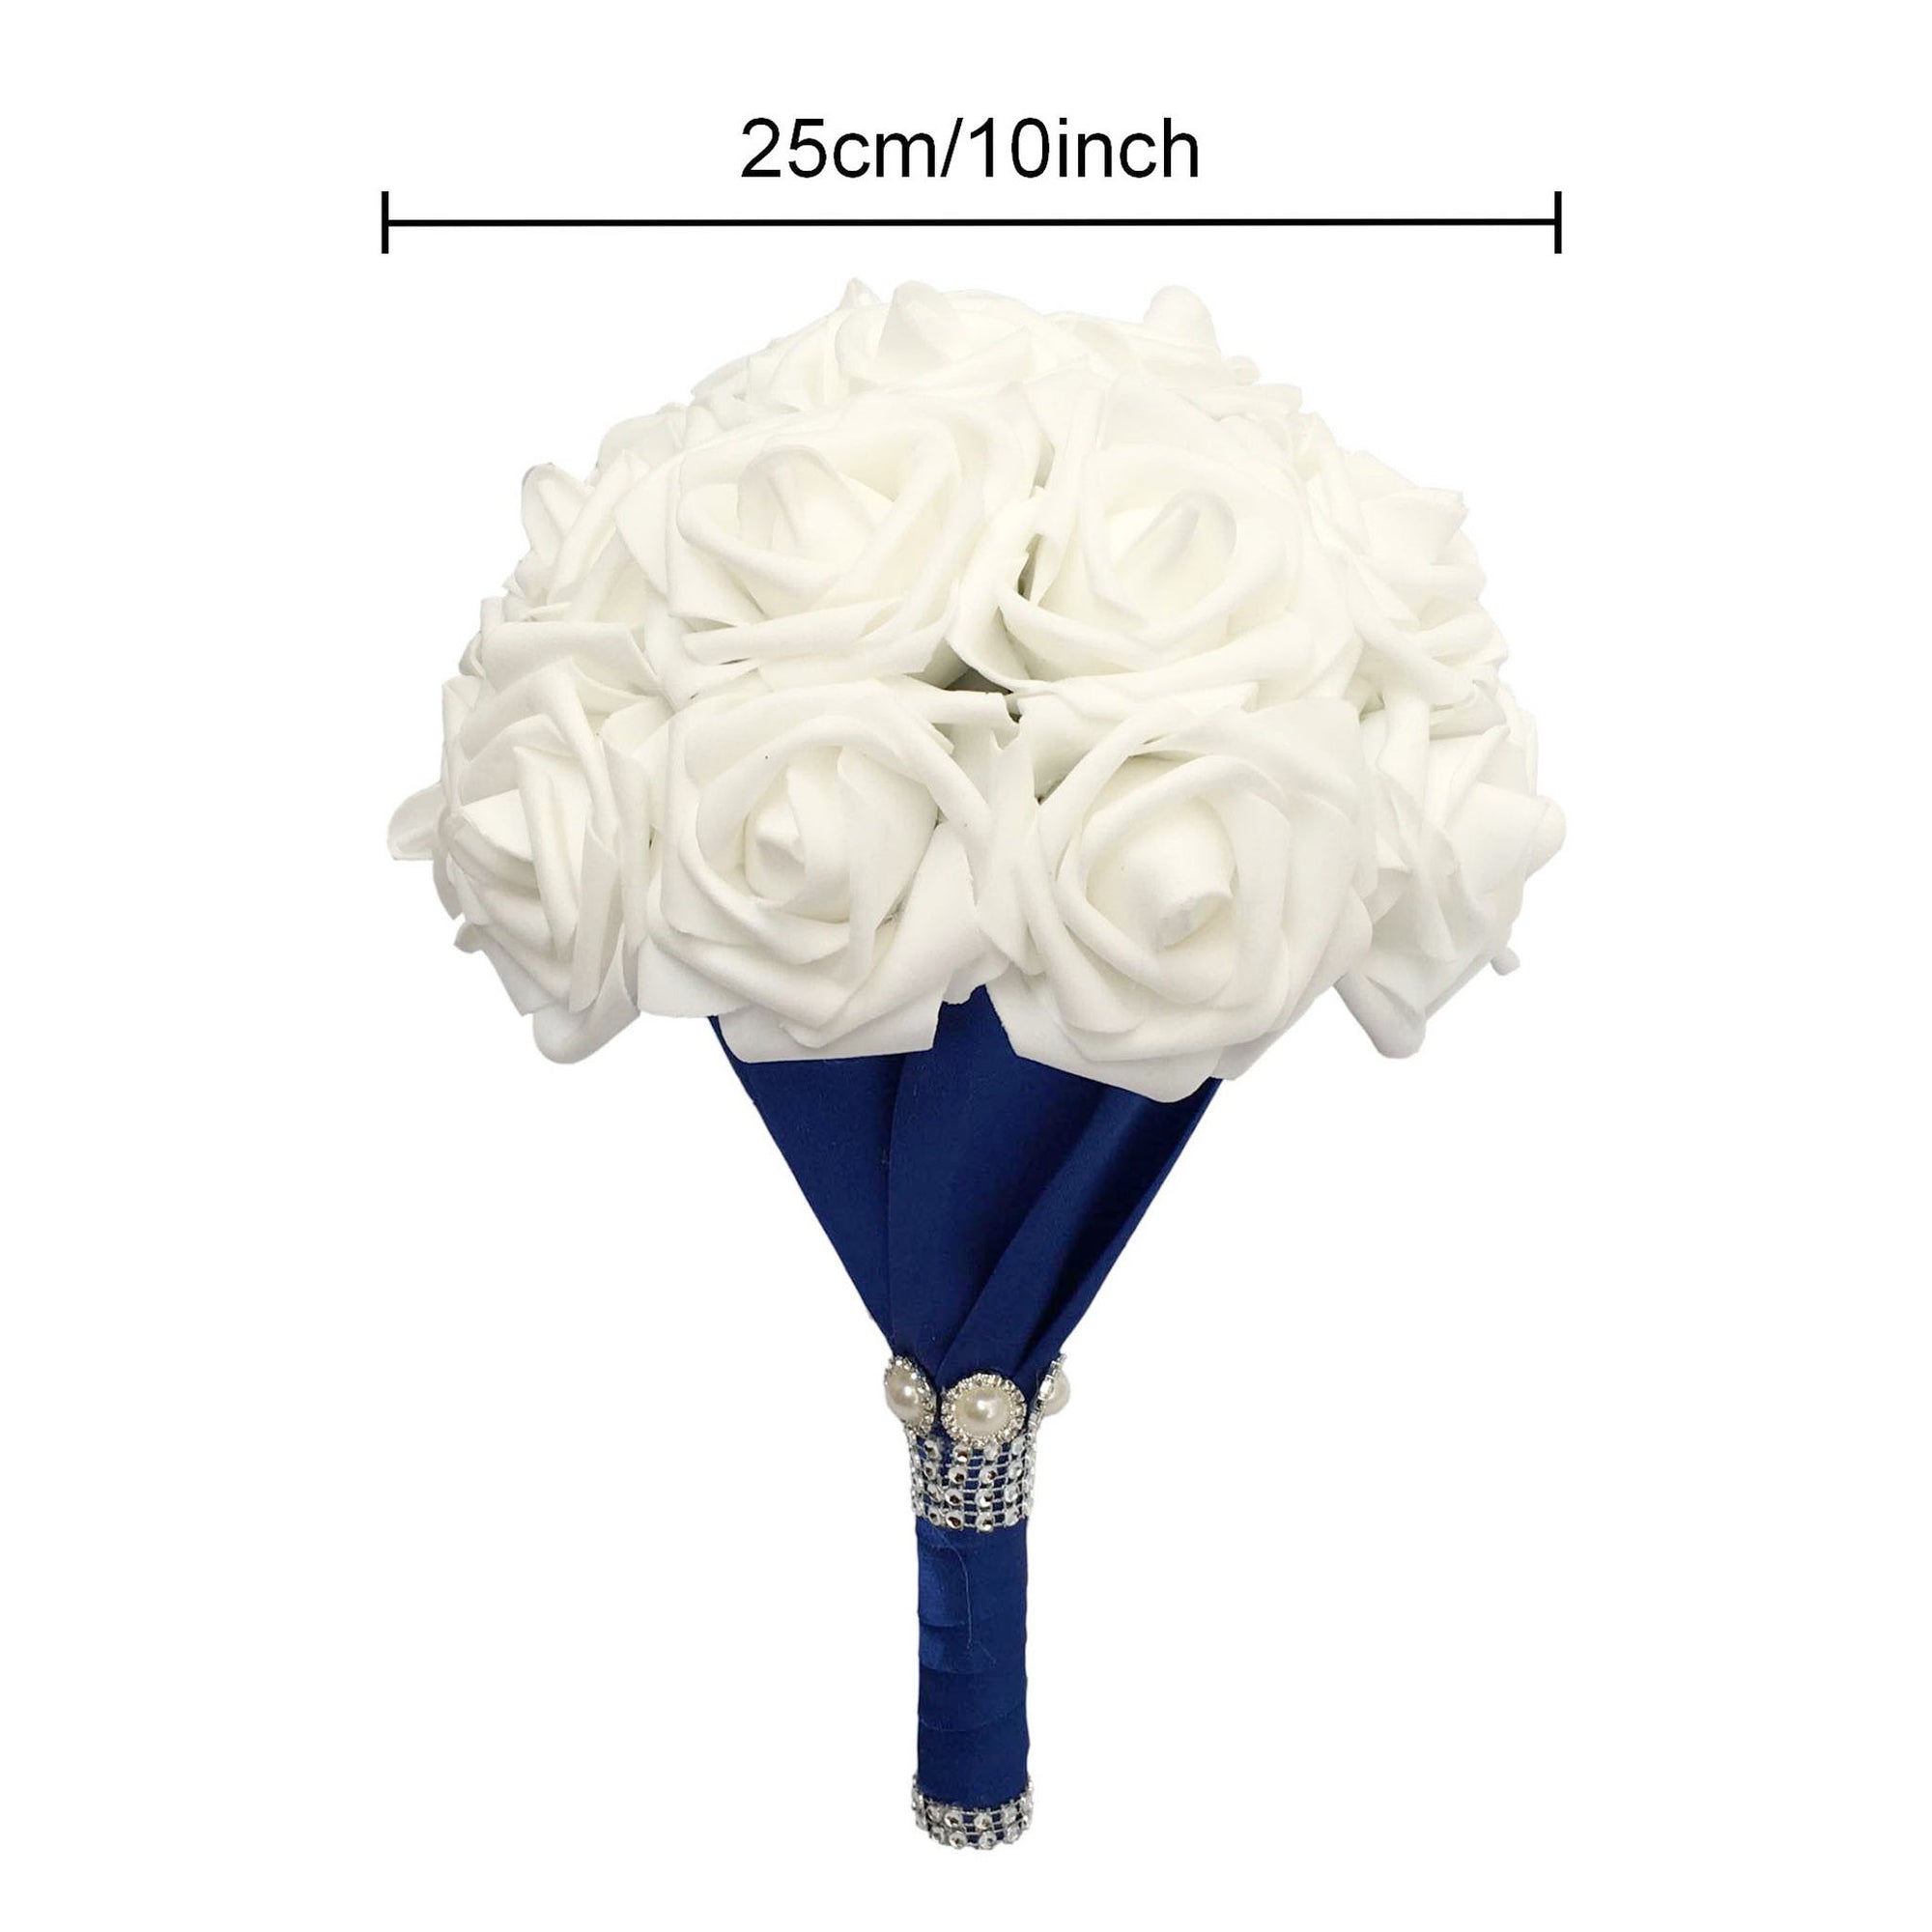 White Rose Bridal Bouquet with Royal Blue Ribbon